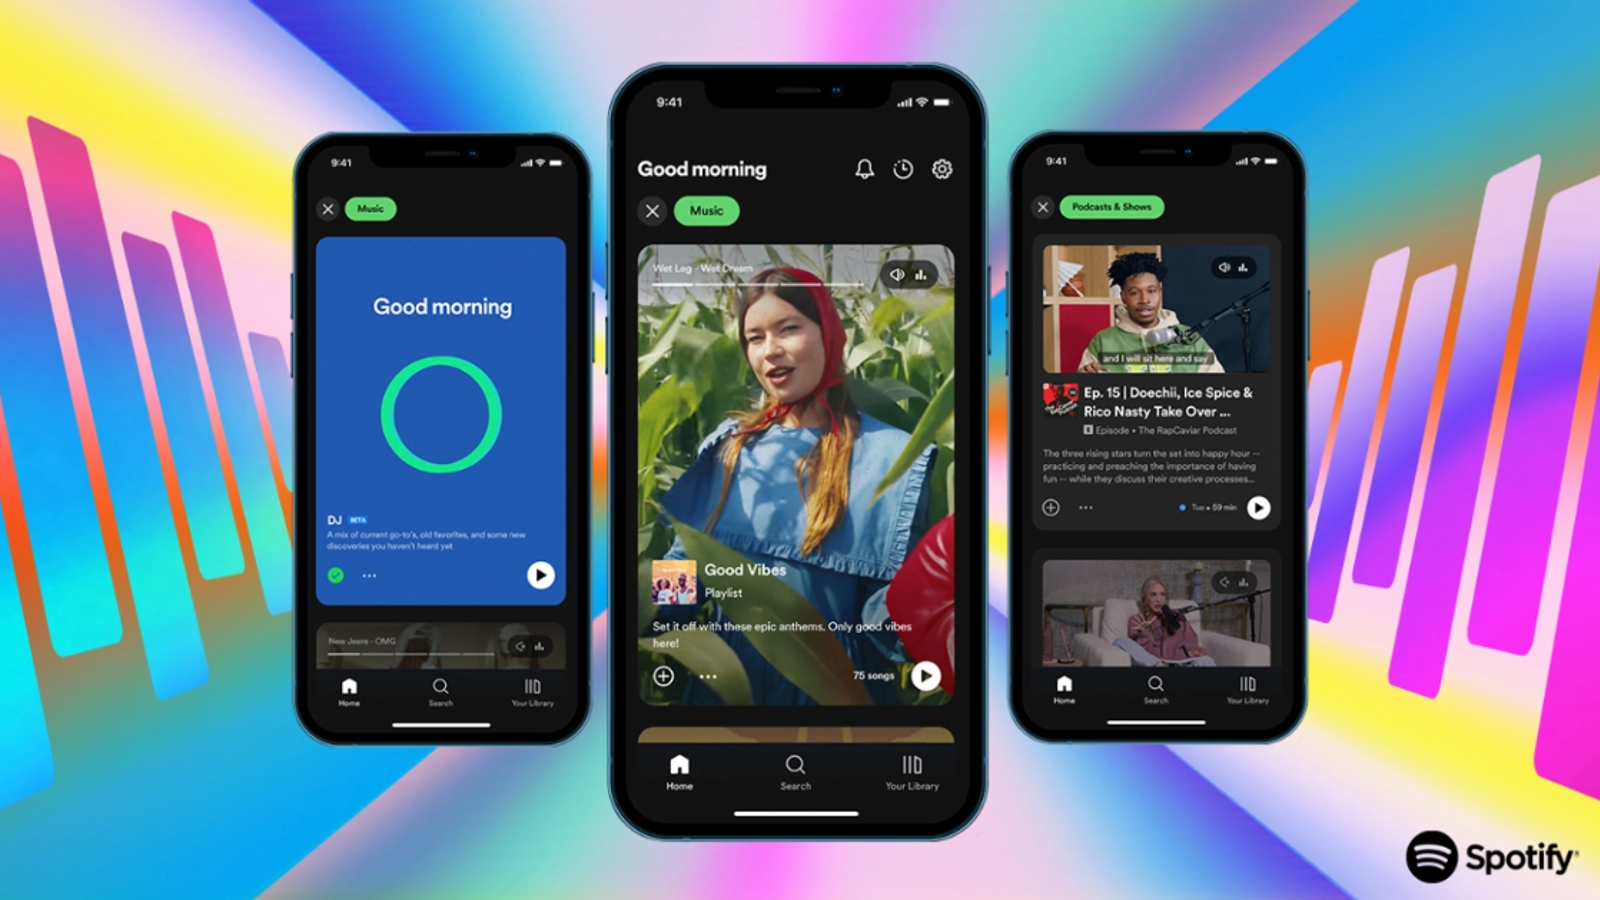 Spotify’s redesign isn’t going well – why are so many apps using the same look?  |  Science & Tech News